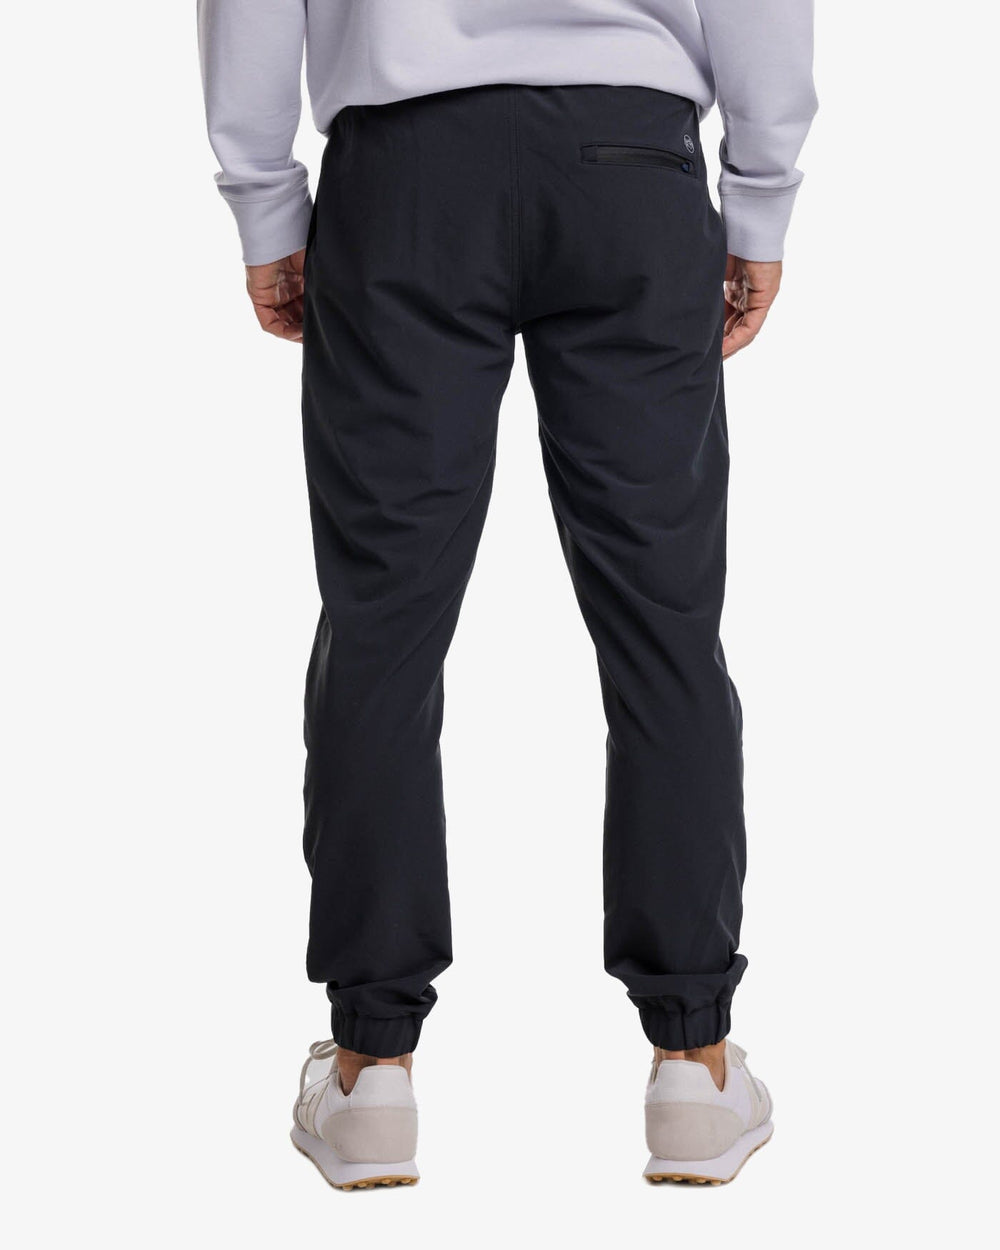 The back view of the Southern Tide The Excursion Performance Jogger by Southern Tide - Caviar Black